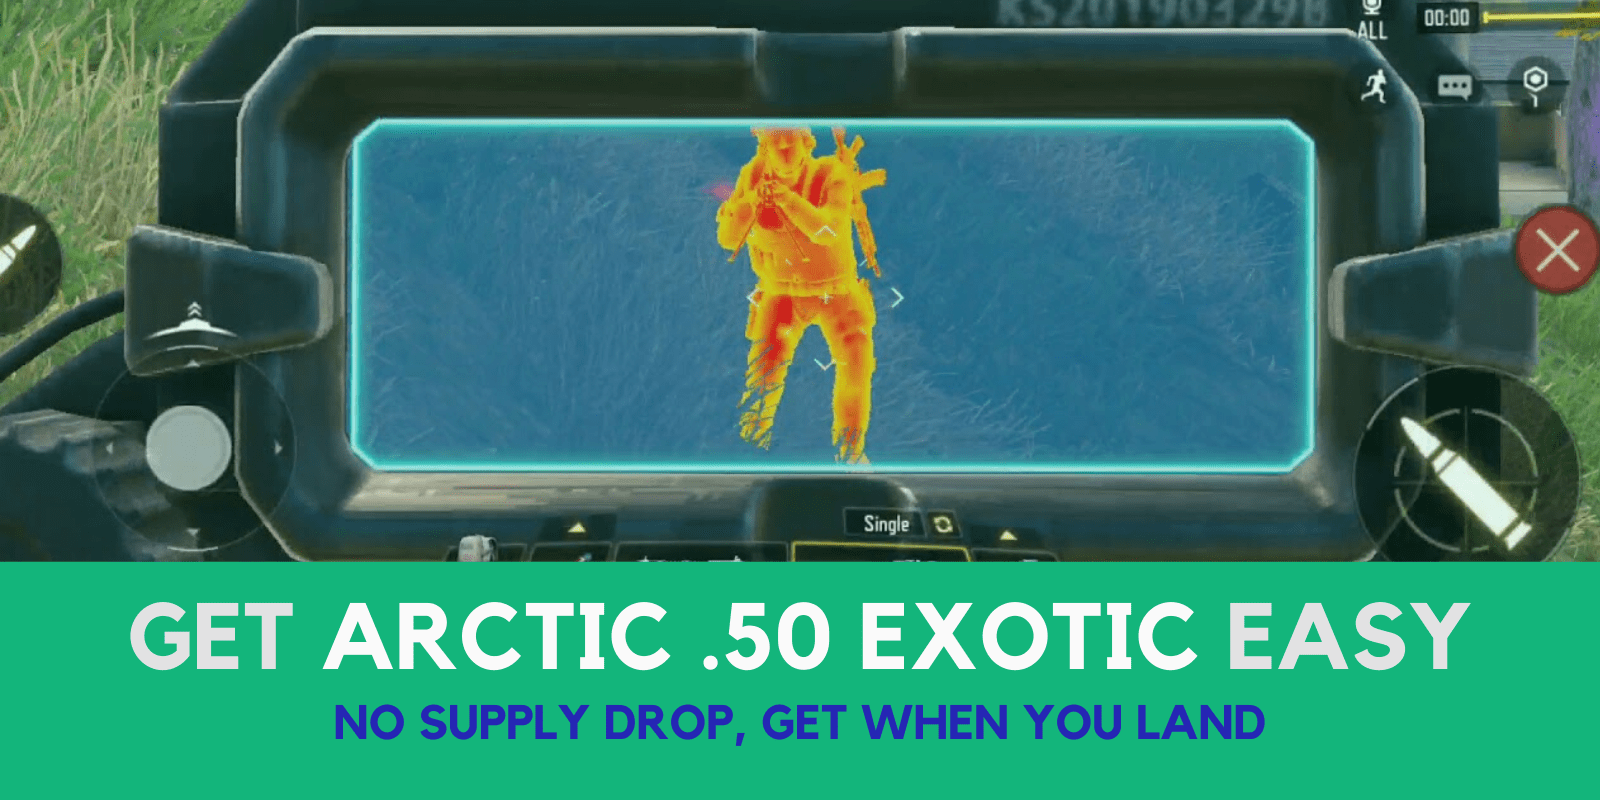 Get the Arctic .50 (Exotic) Easy and Every time (Not Supply Drop)